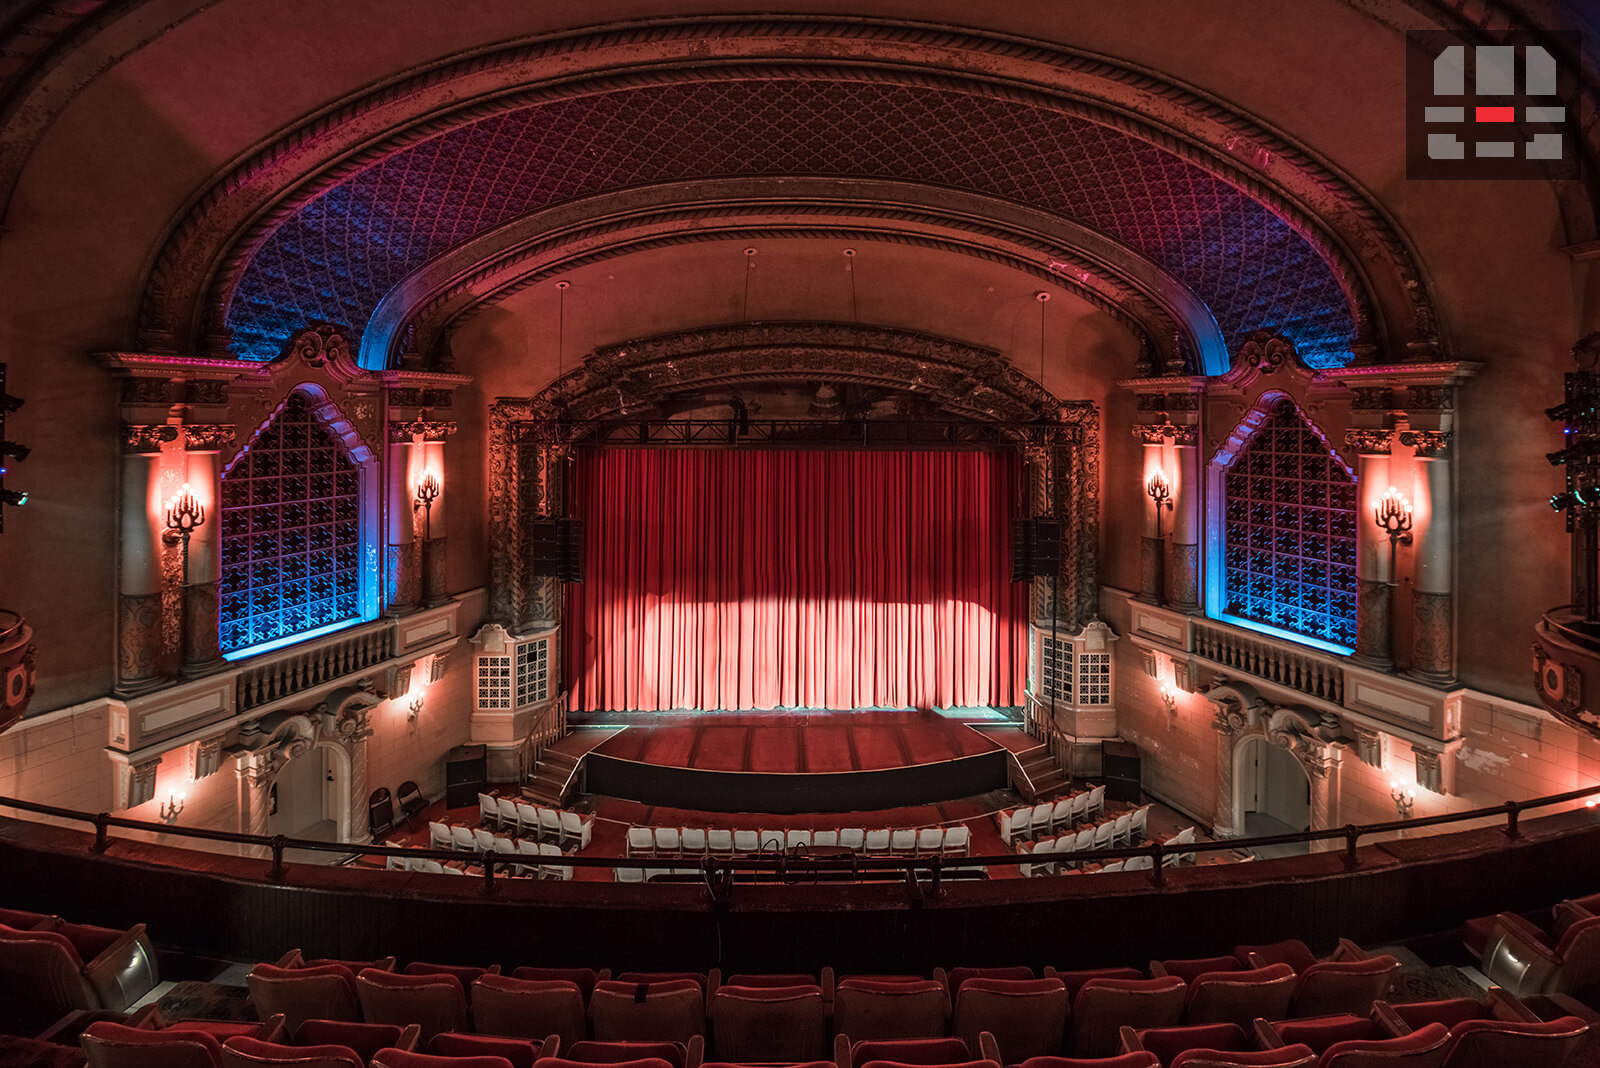 Orpheum Theatre Los Angeles Seating Chart